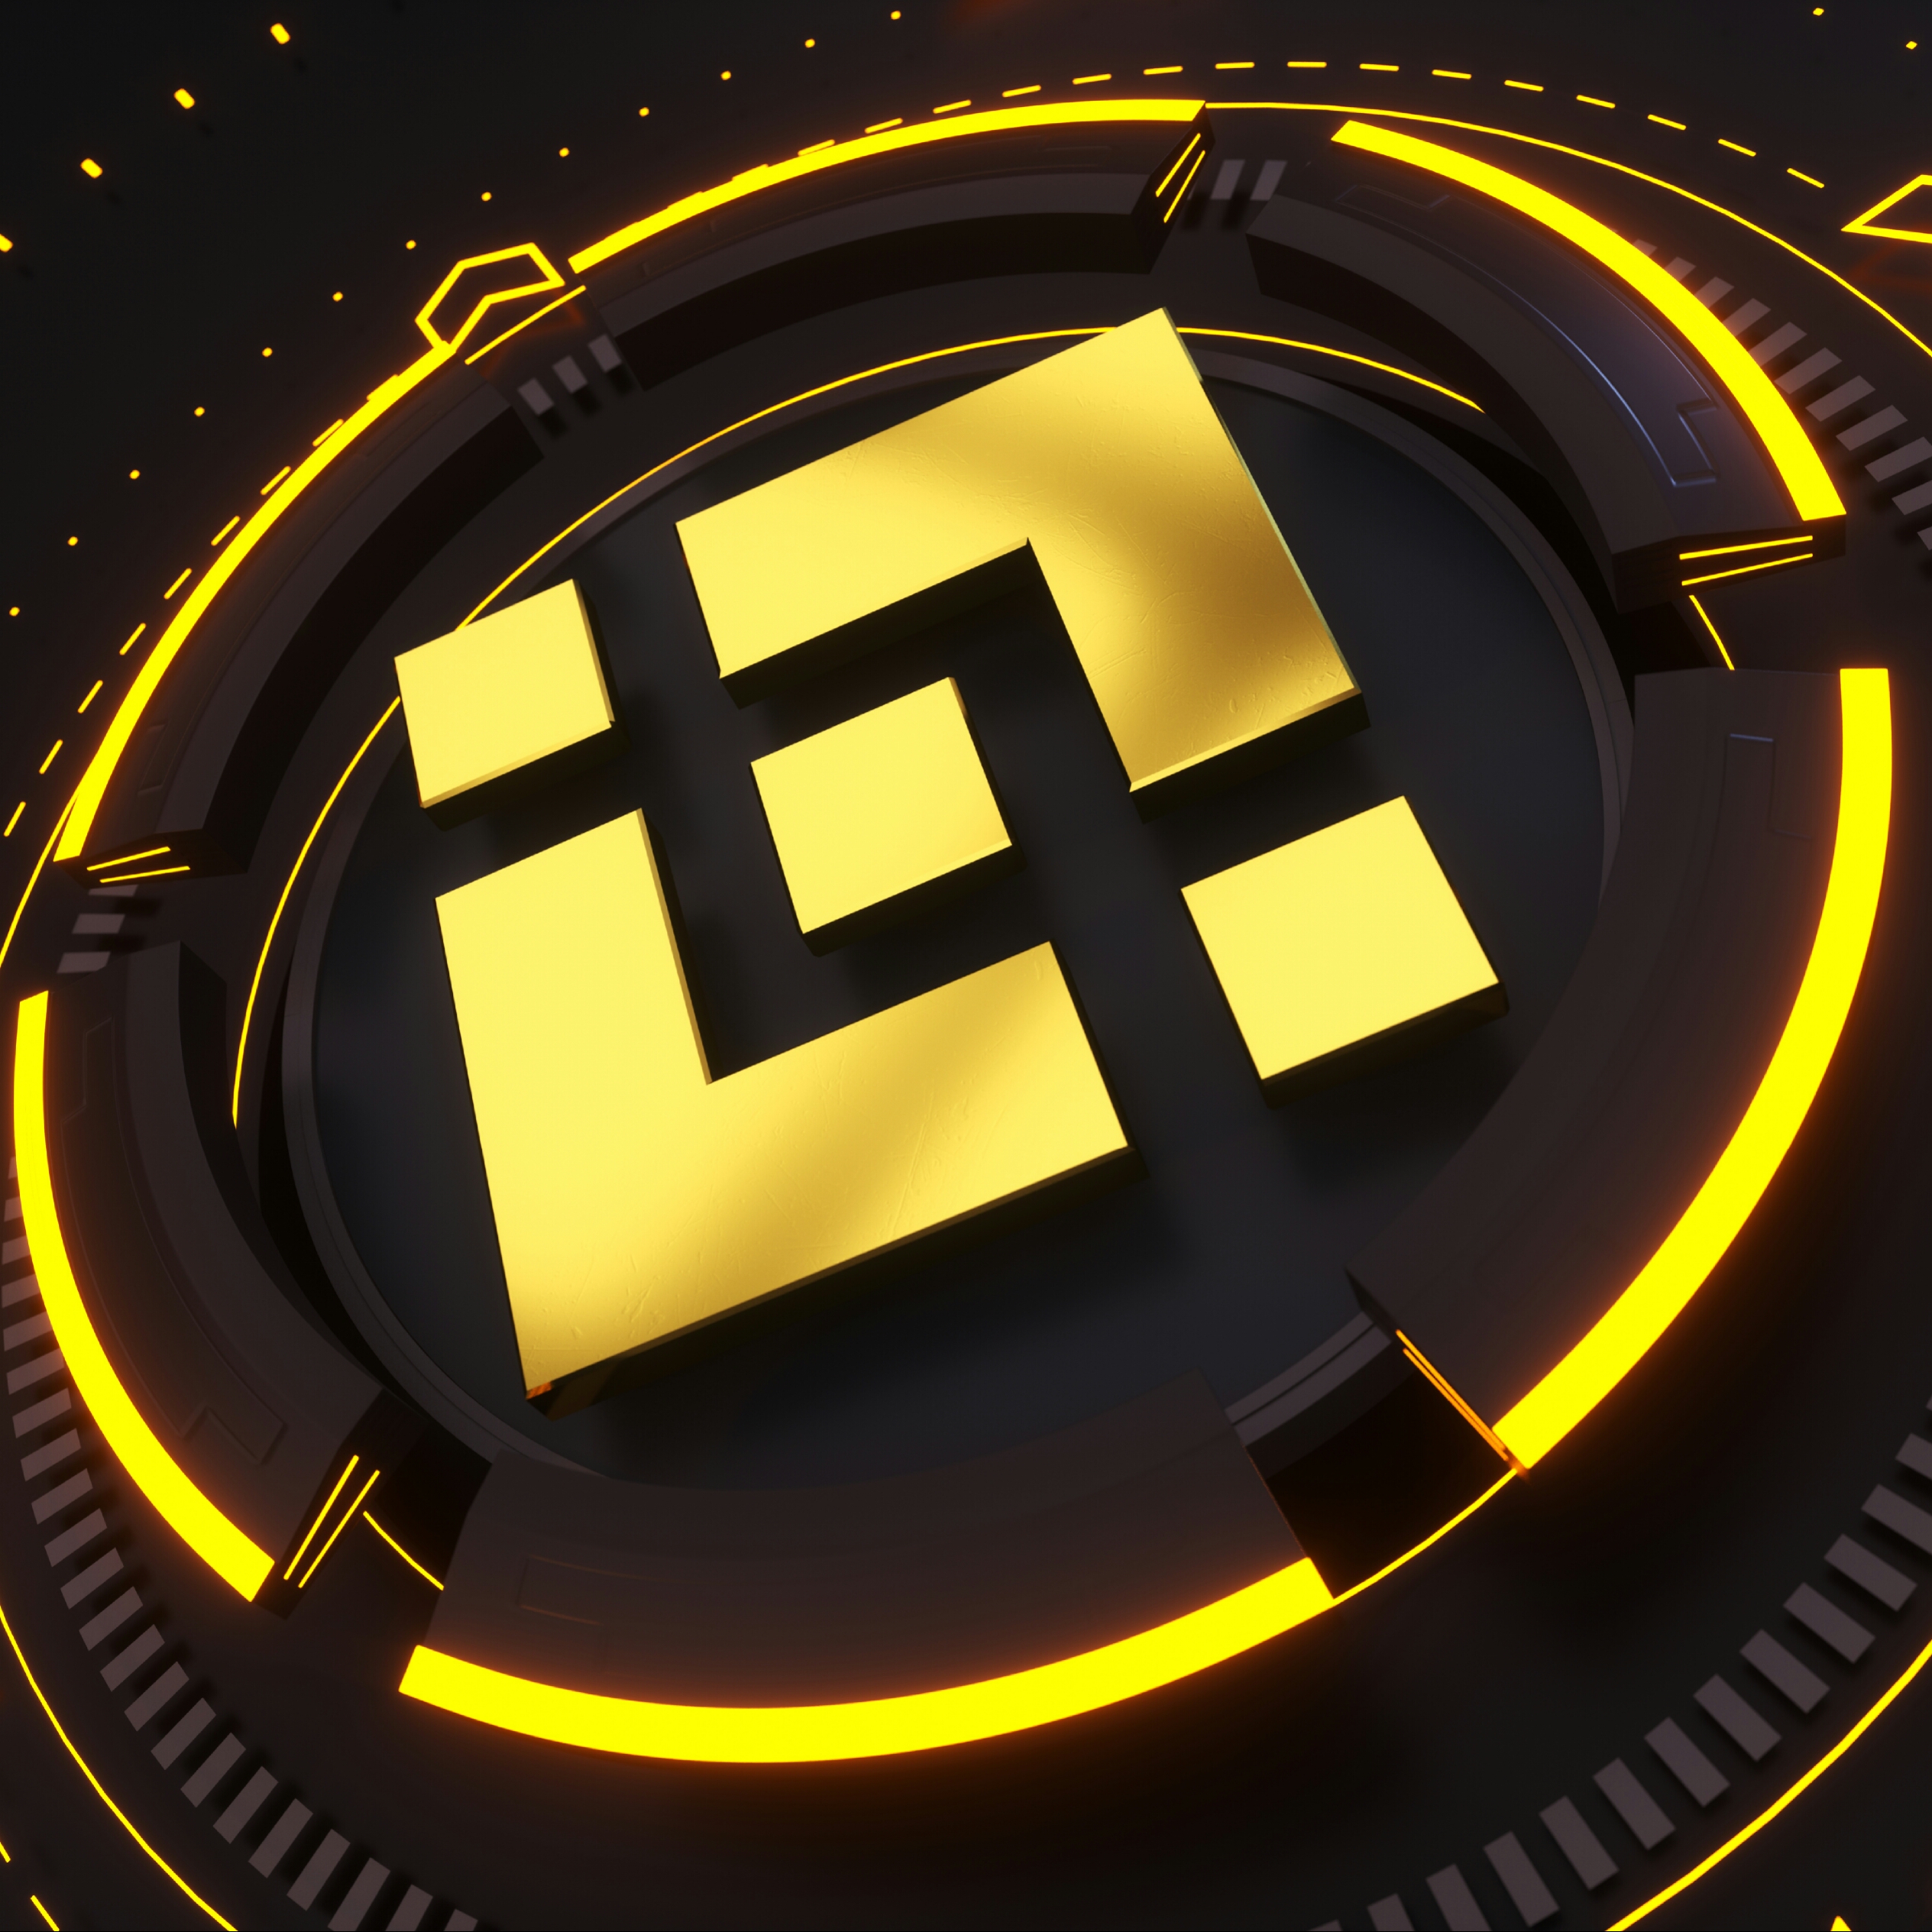 No Respite for Thousands of Binance Users Controversially Cut off by the Exchange